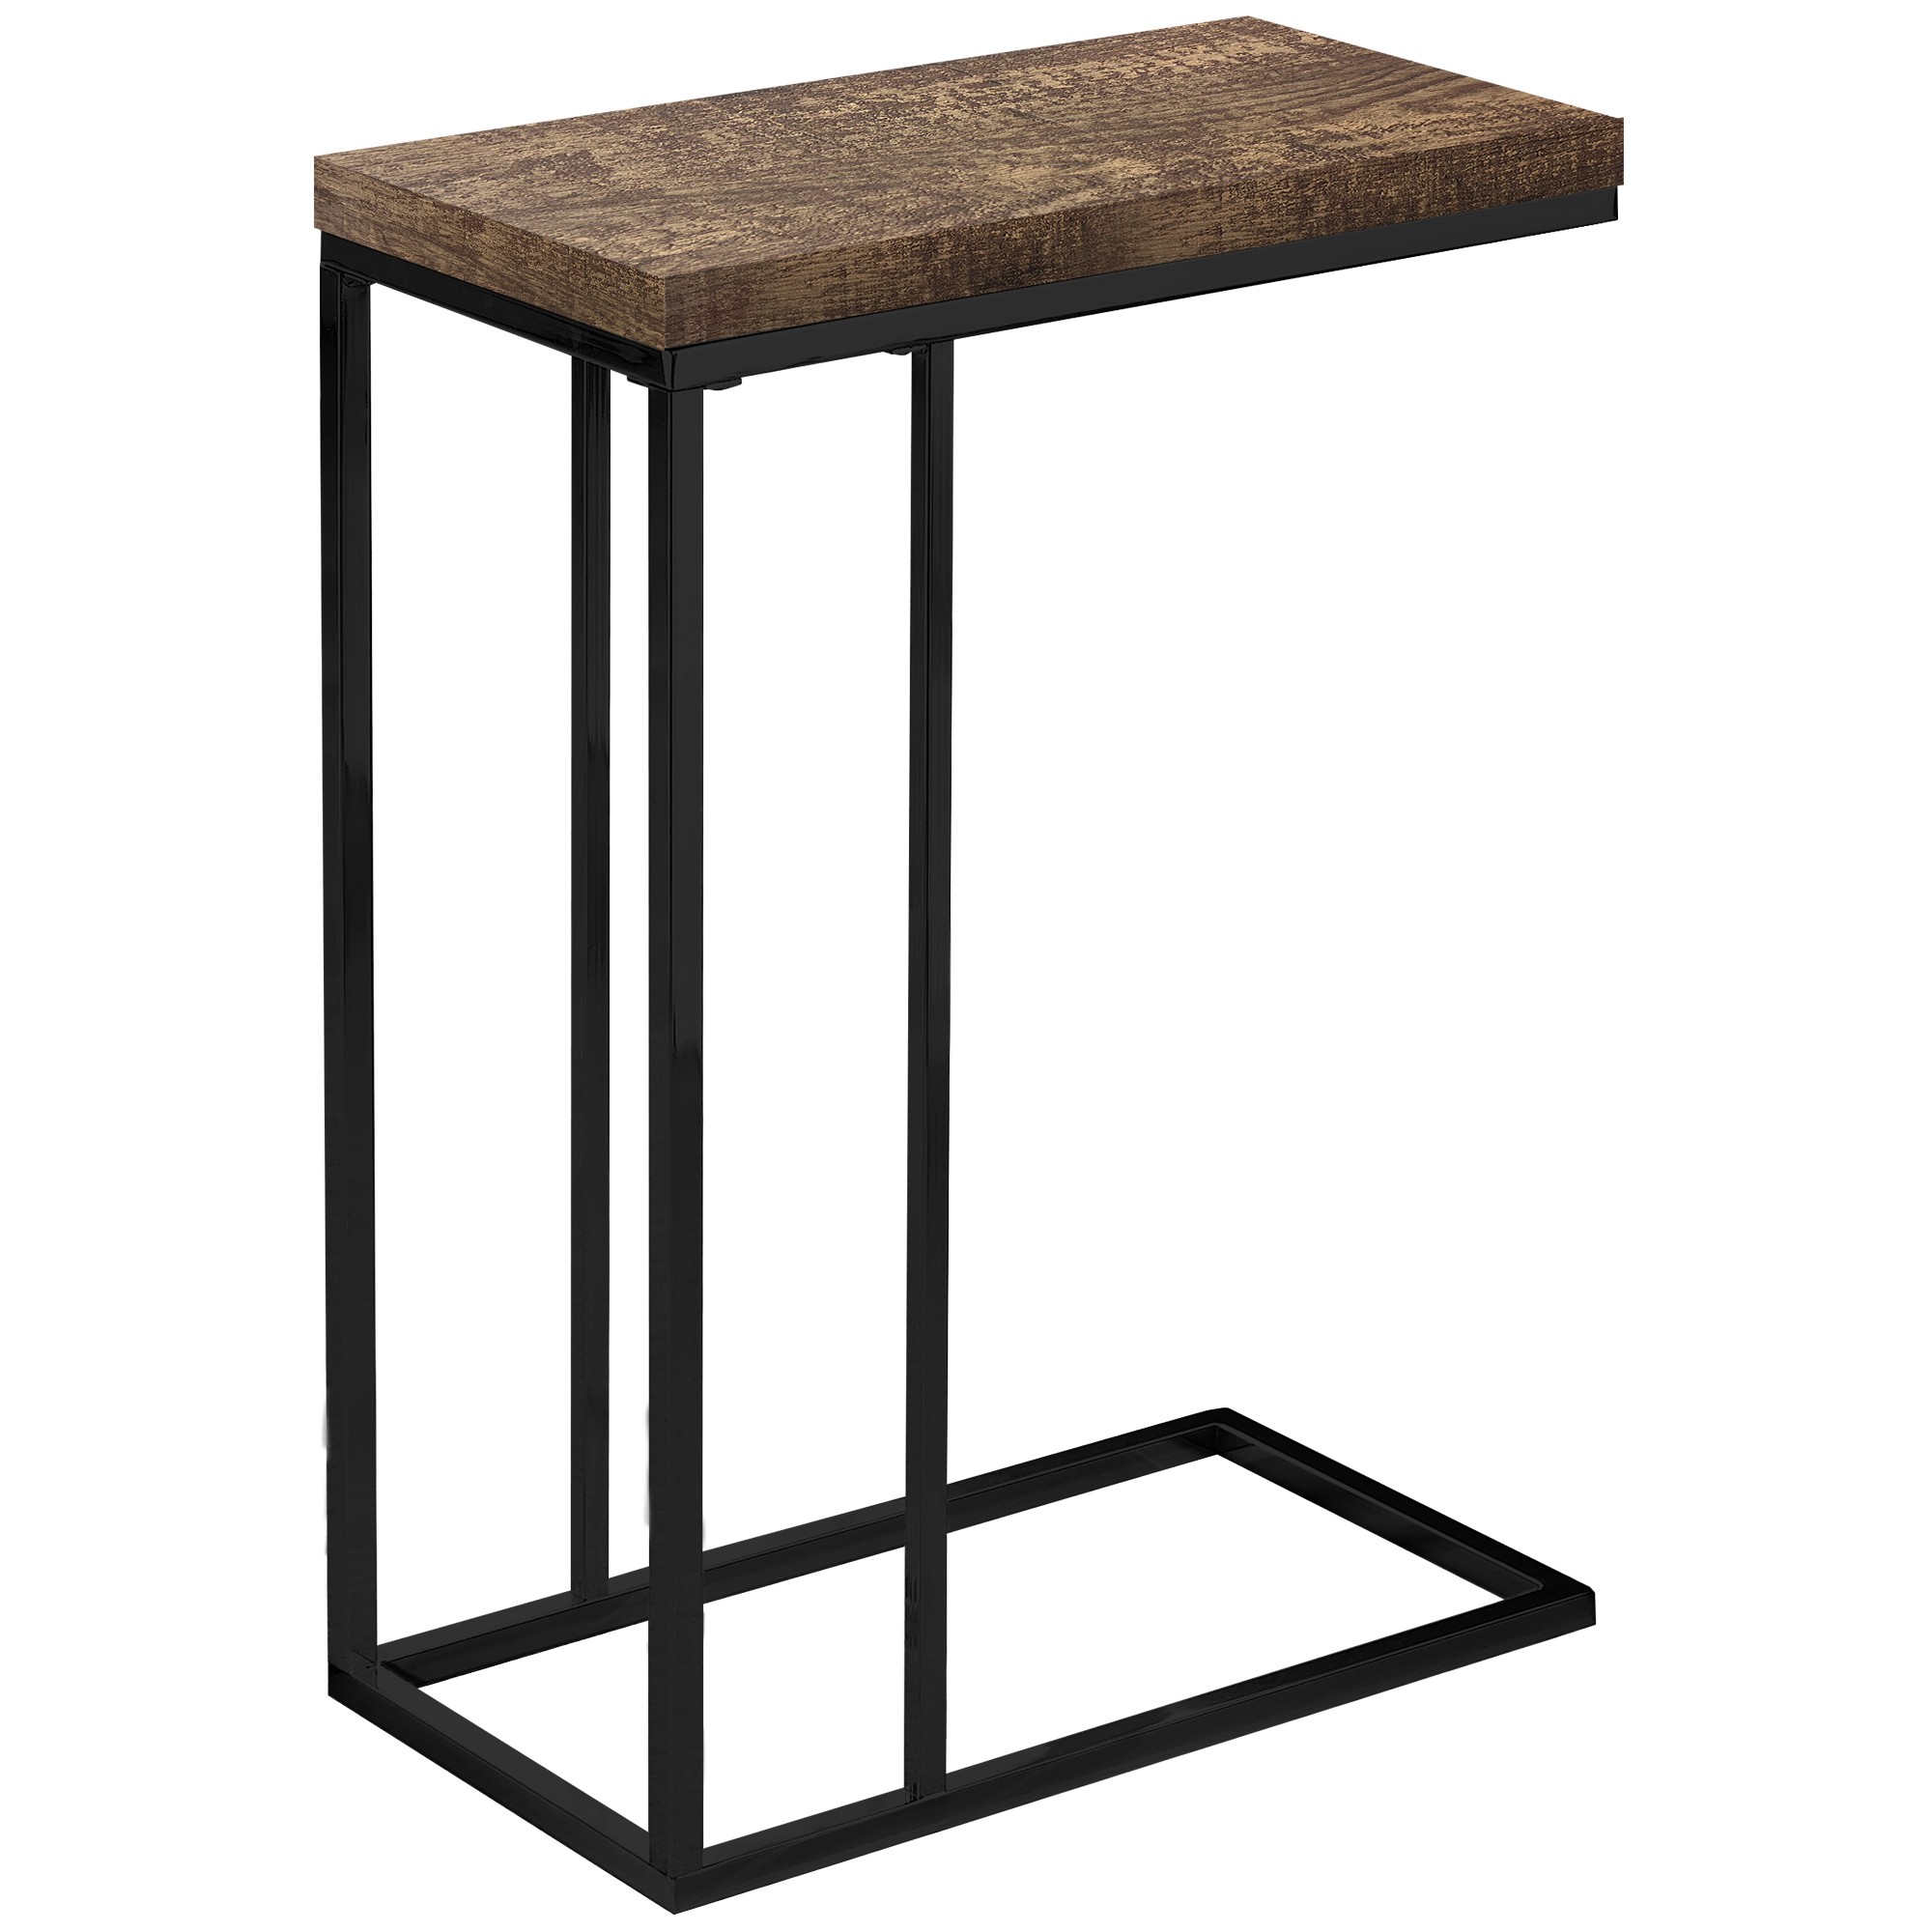 18.25" x 10.25" x 25.25" BrownBlack Particle Board Metal Accent Table